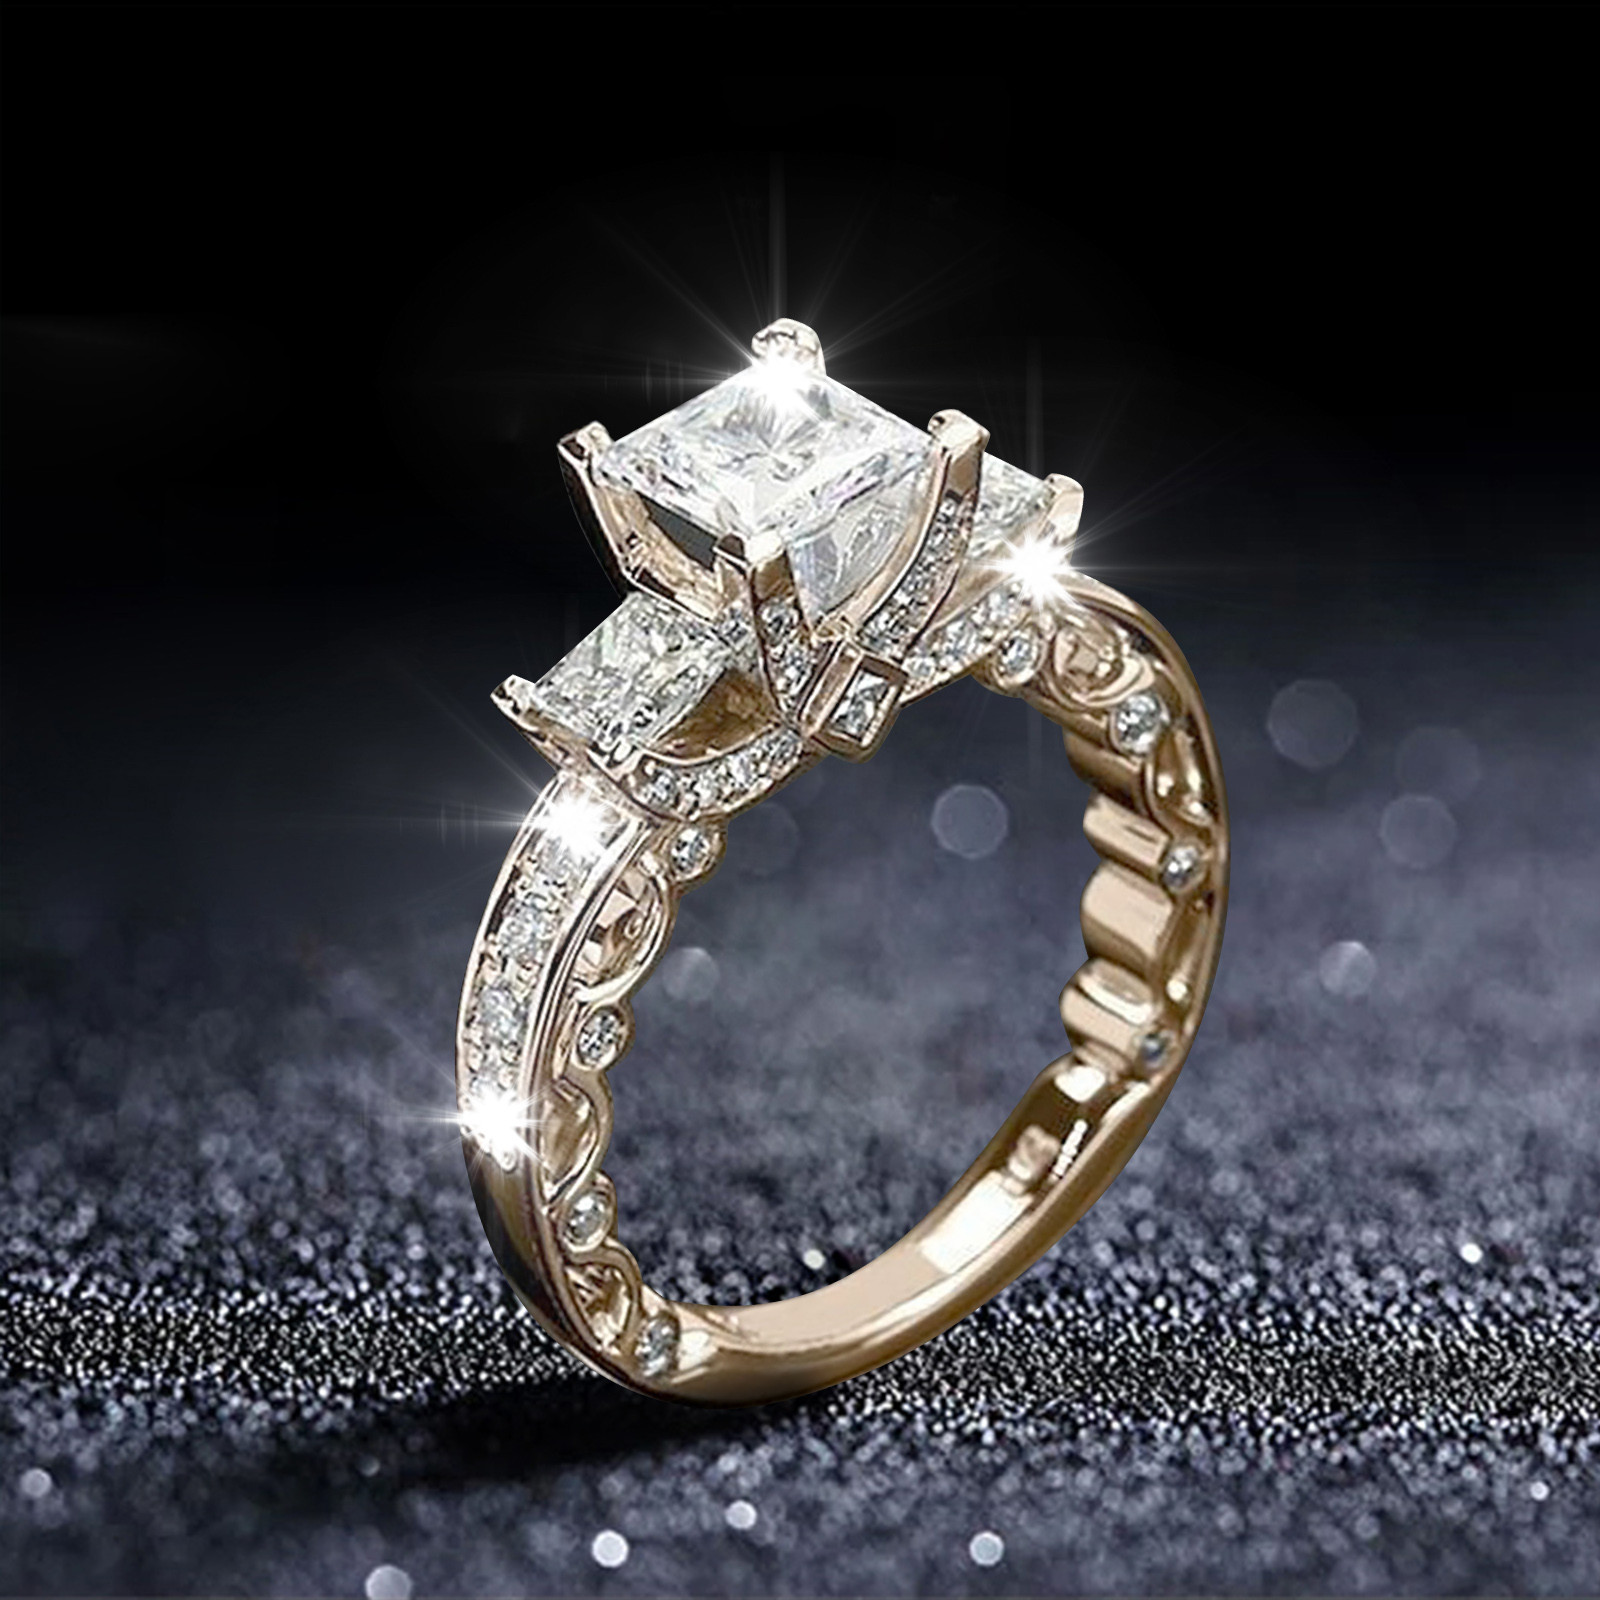 Ring for Women Diamond Popular Exquisite Simple Fashion Jewelry Popular  Accessories Women's Ring 